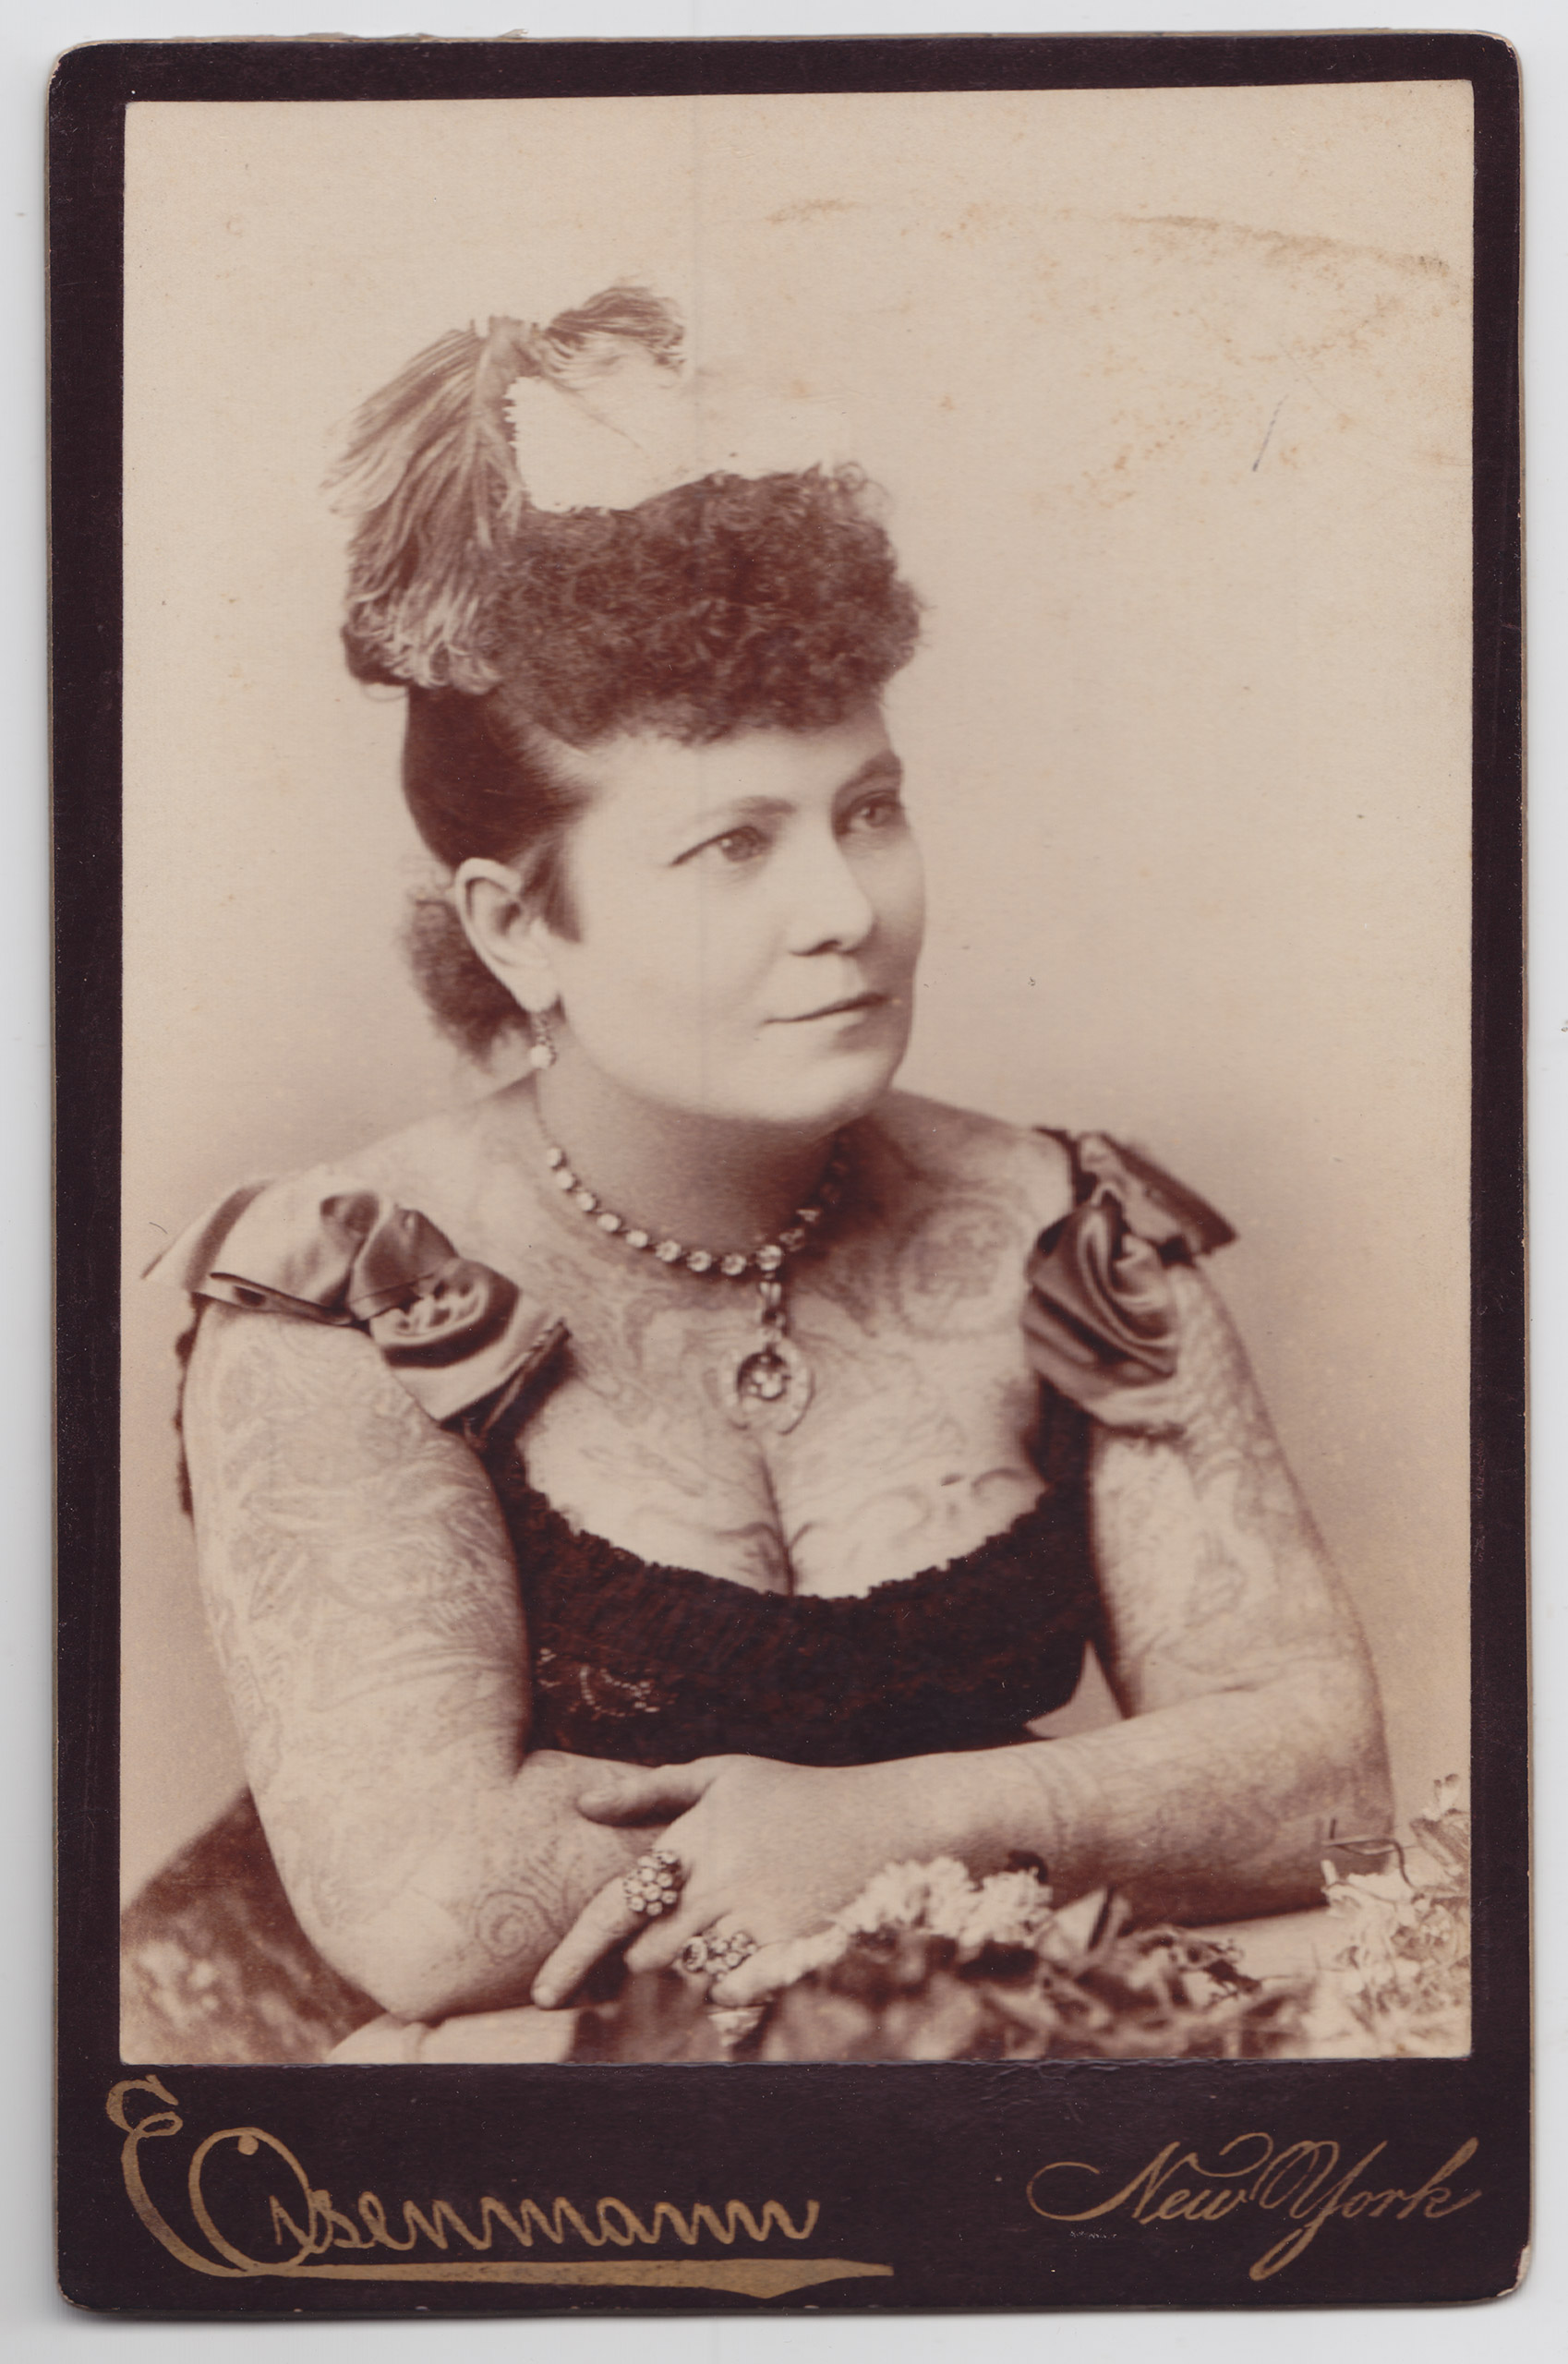 From Tattooed New York at the New-York Historical Society: Nora Hildebrandt, ca. 1880. Photograph by Charles Eisenmann.